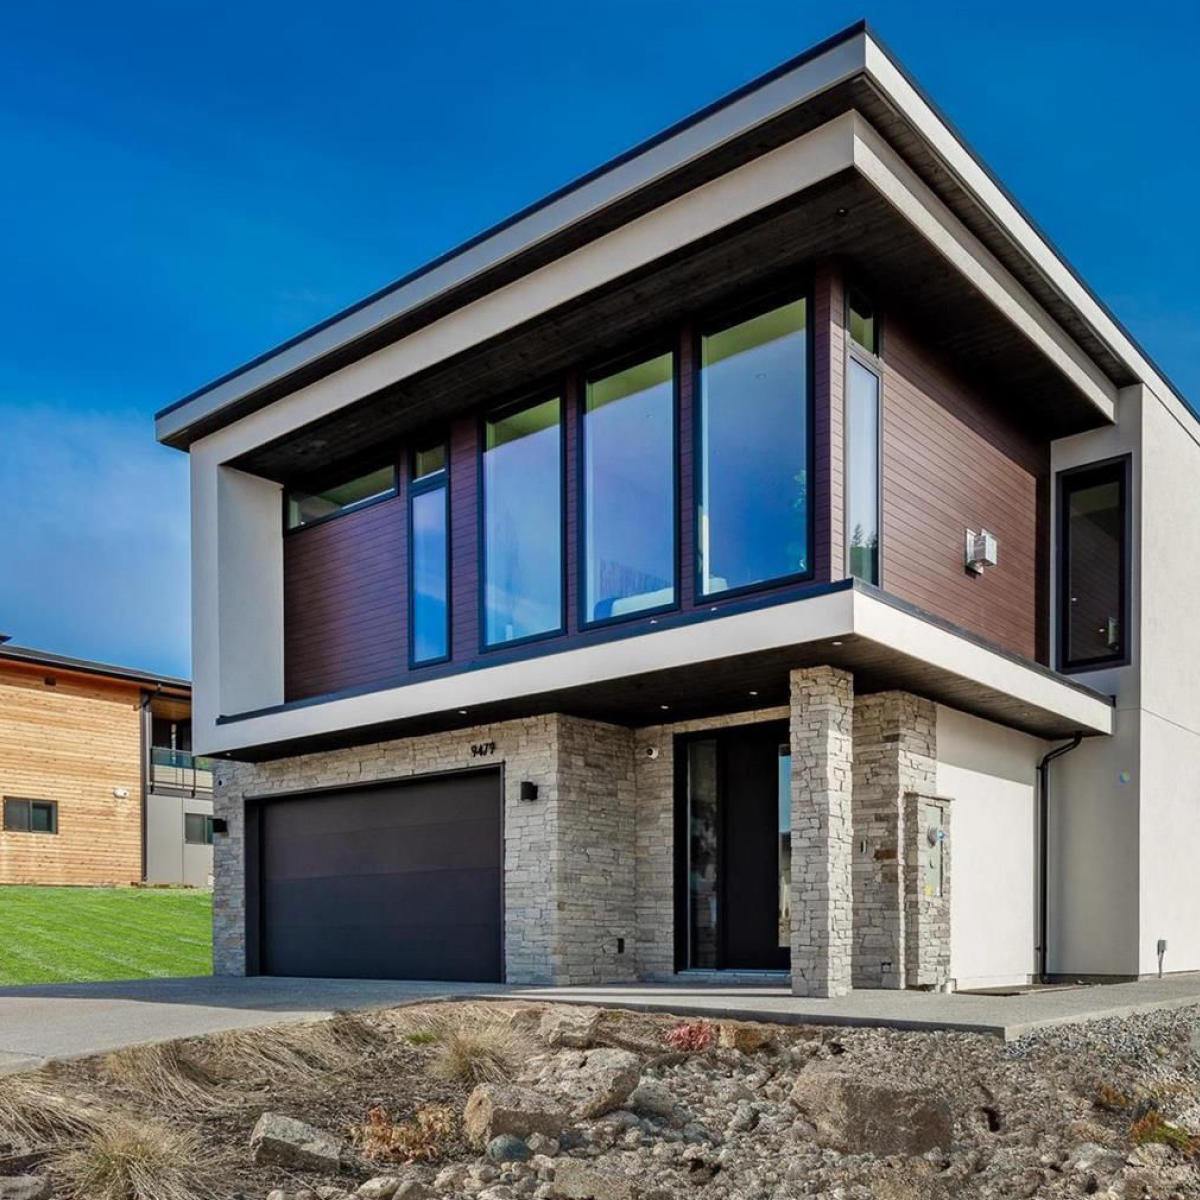 Welcome to this stunning new home in Lakestone, built with the utmost attention to detail by award w